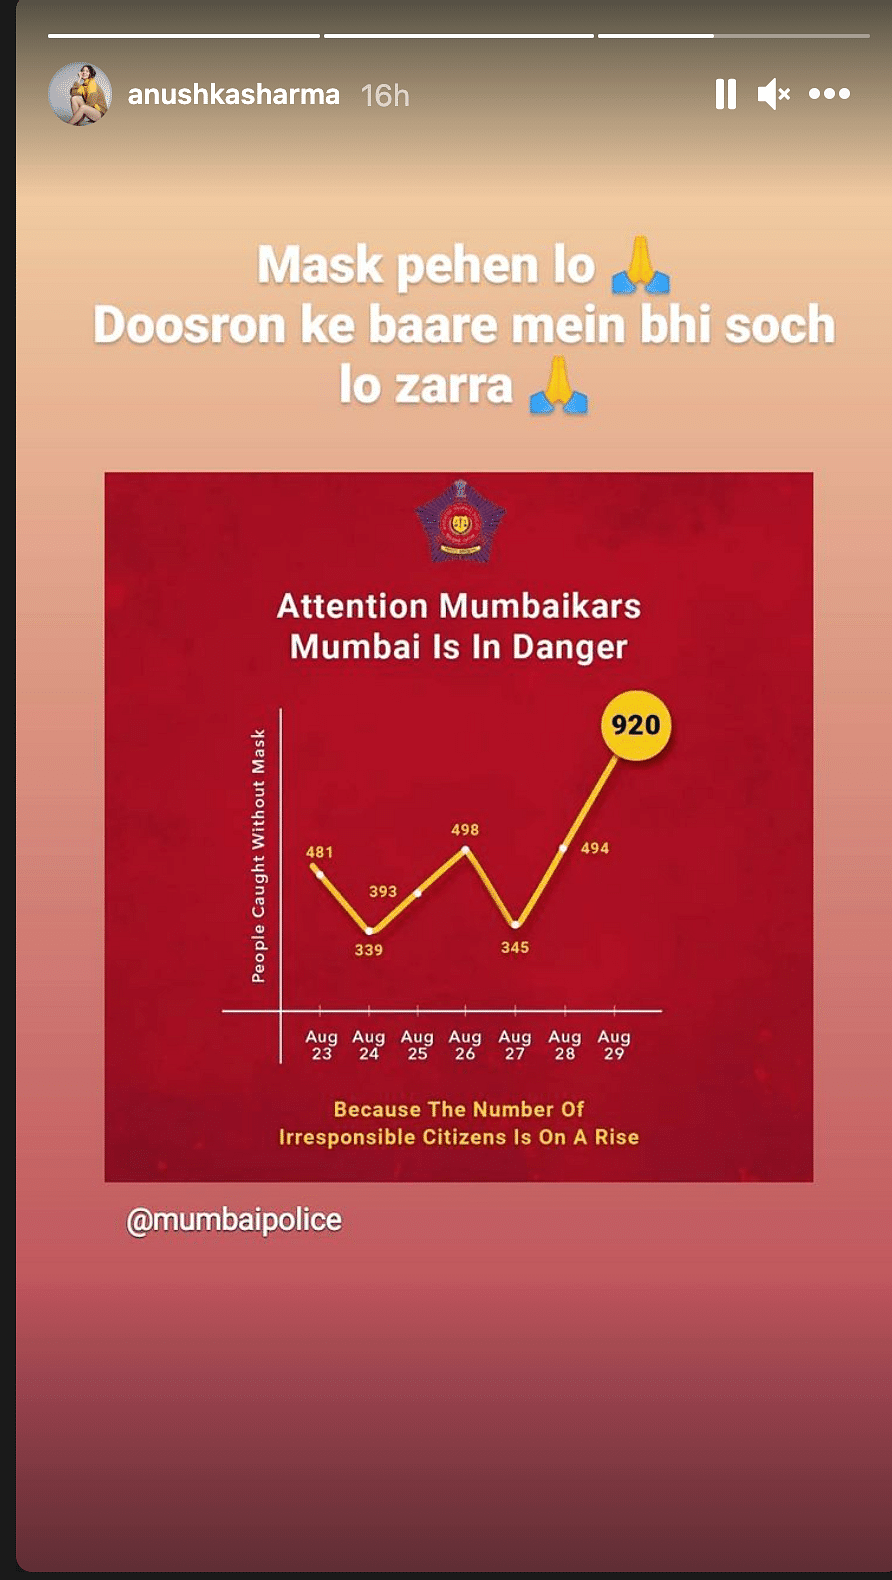 Anushka Sharma shared a post by Mumbai Police showing the number of people caught for not wearing masks. 